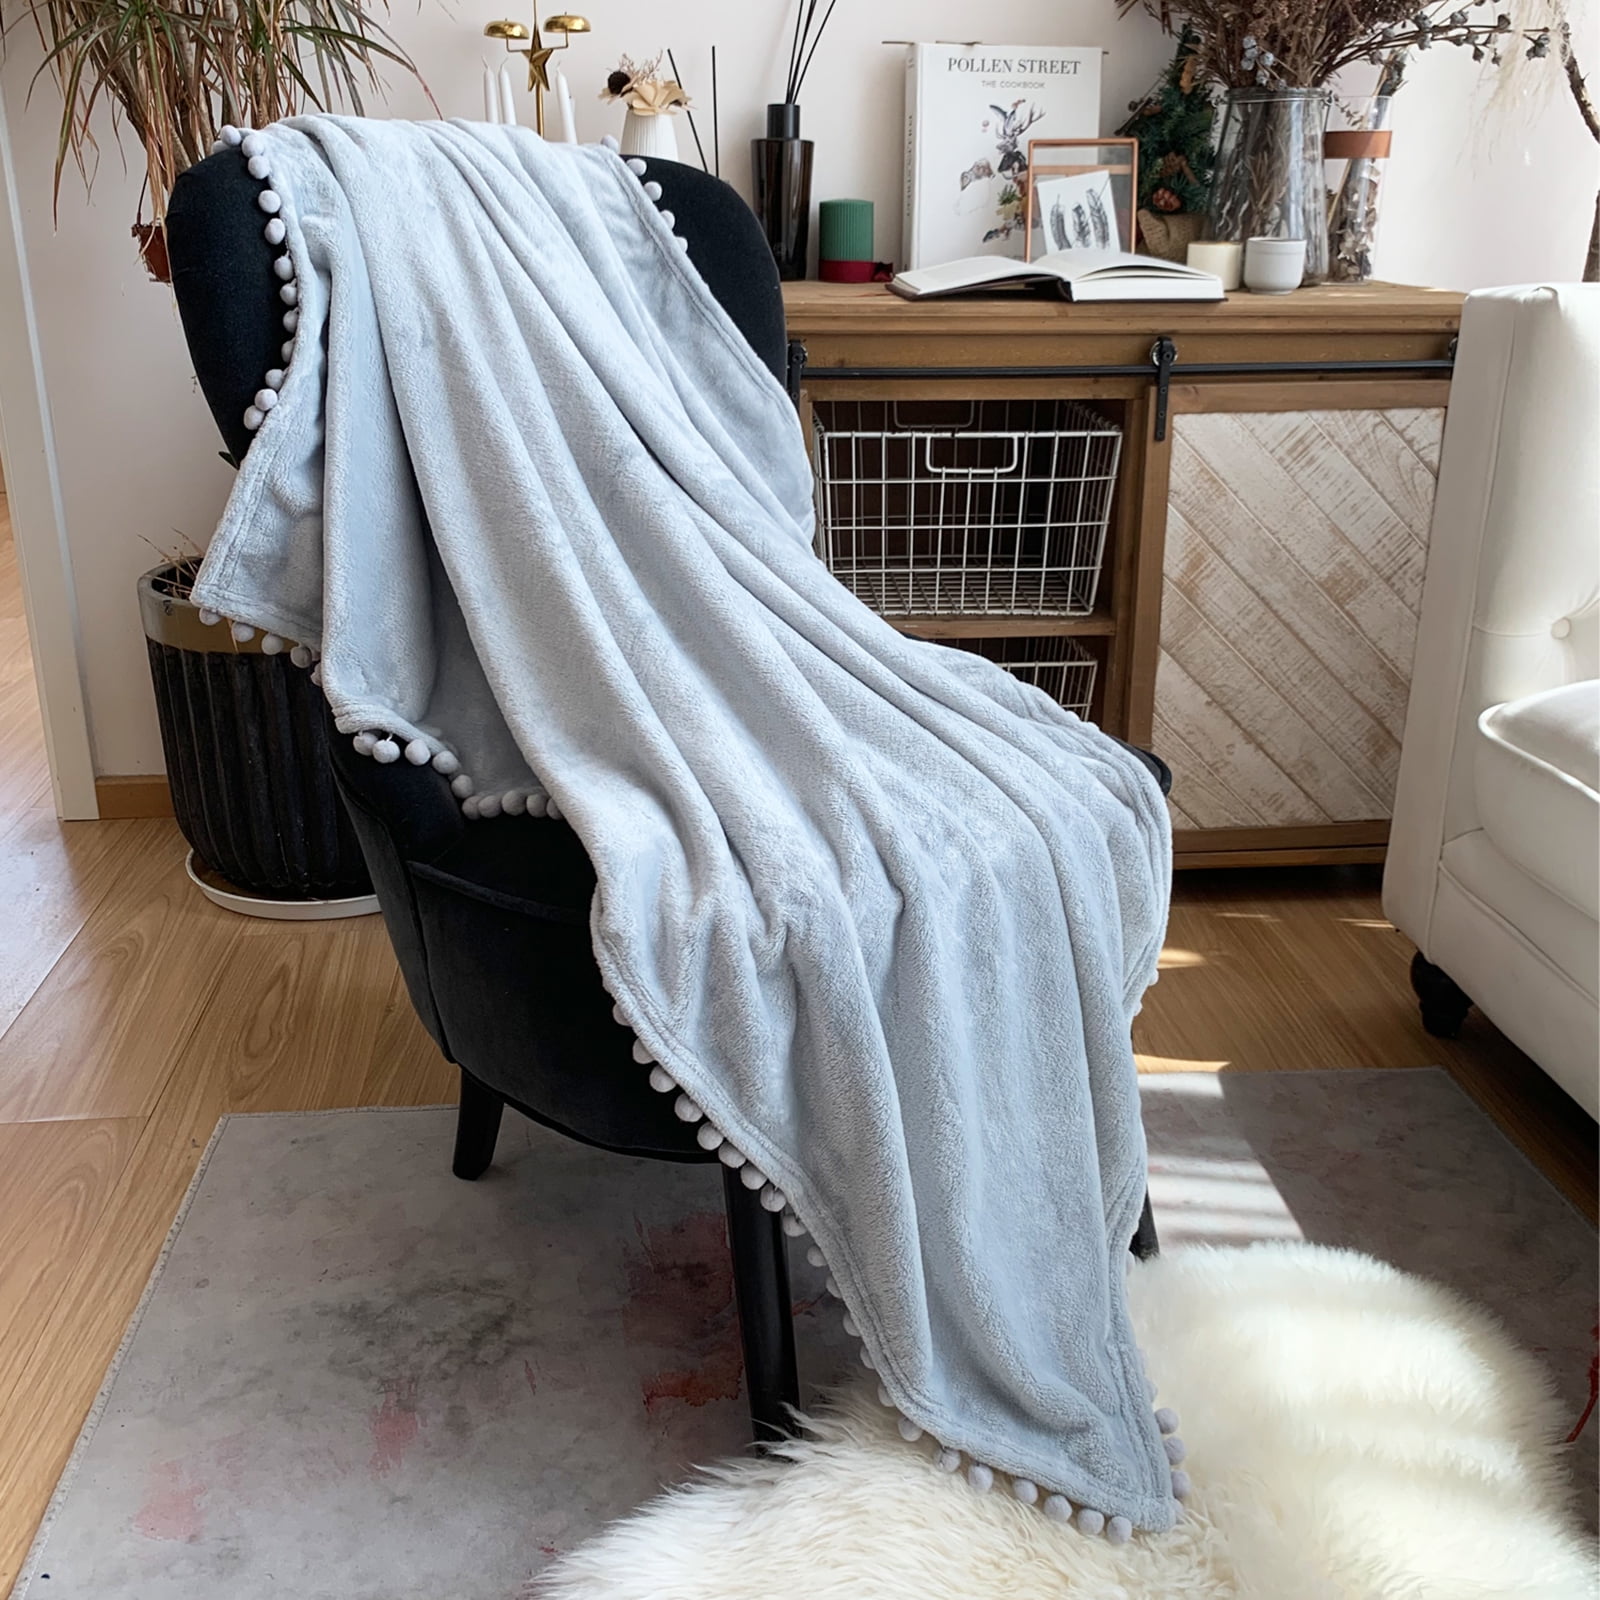 Snuggle touch Micro Fibre Fleece Blanket Throw Priced To Clear 